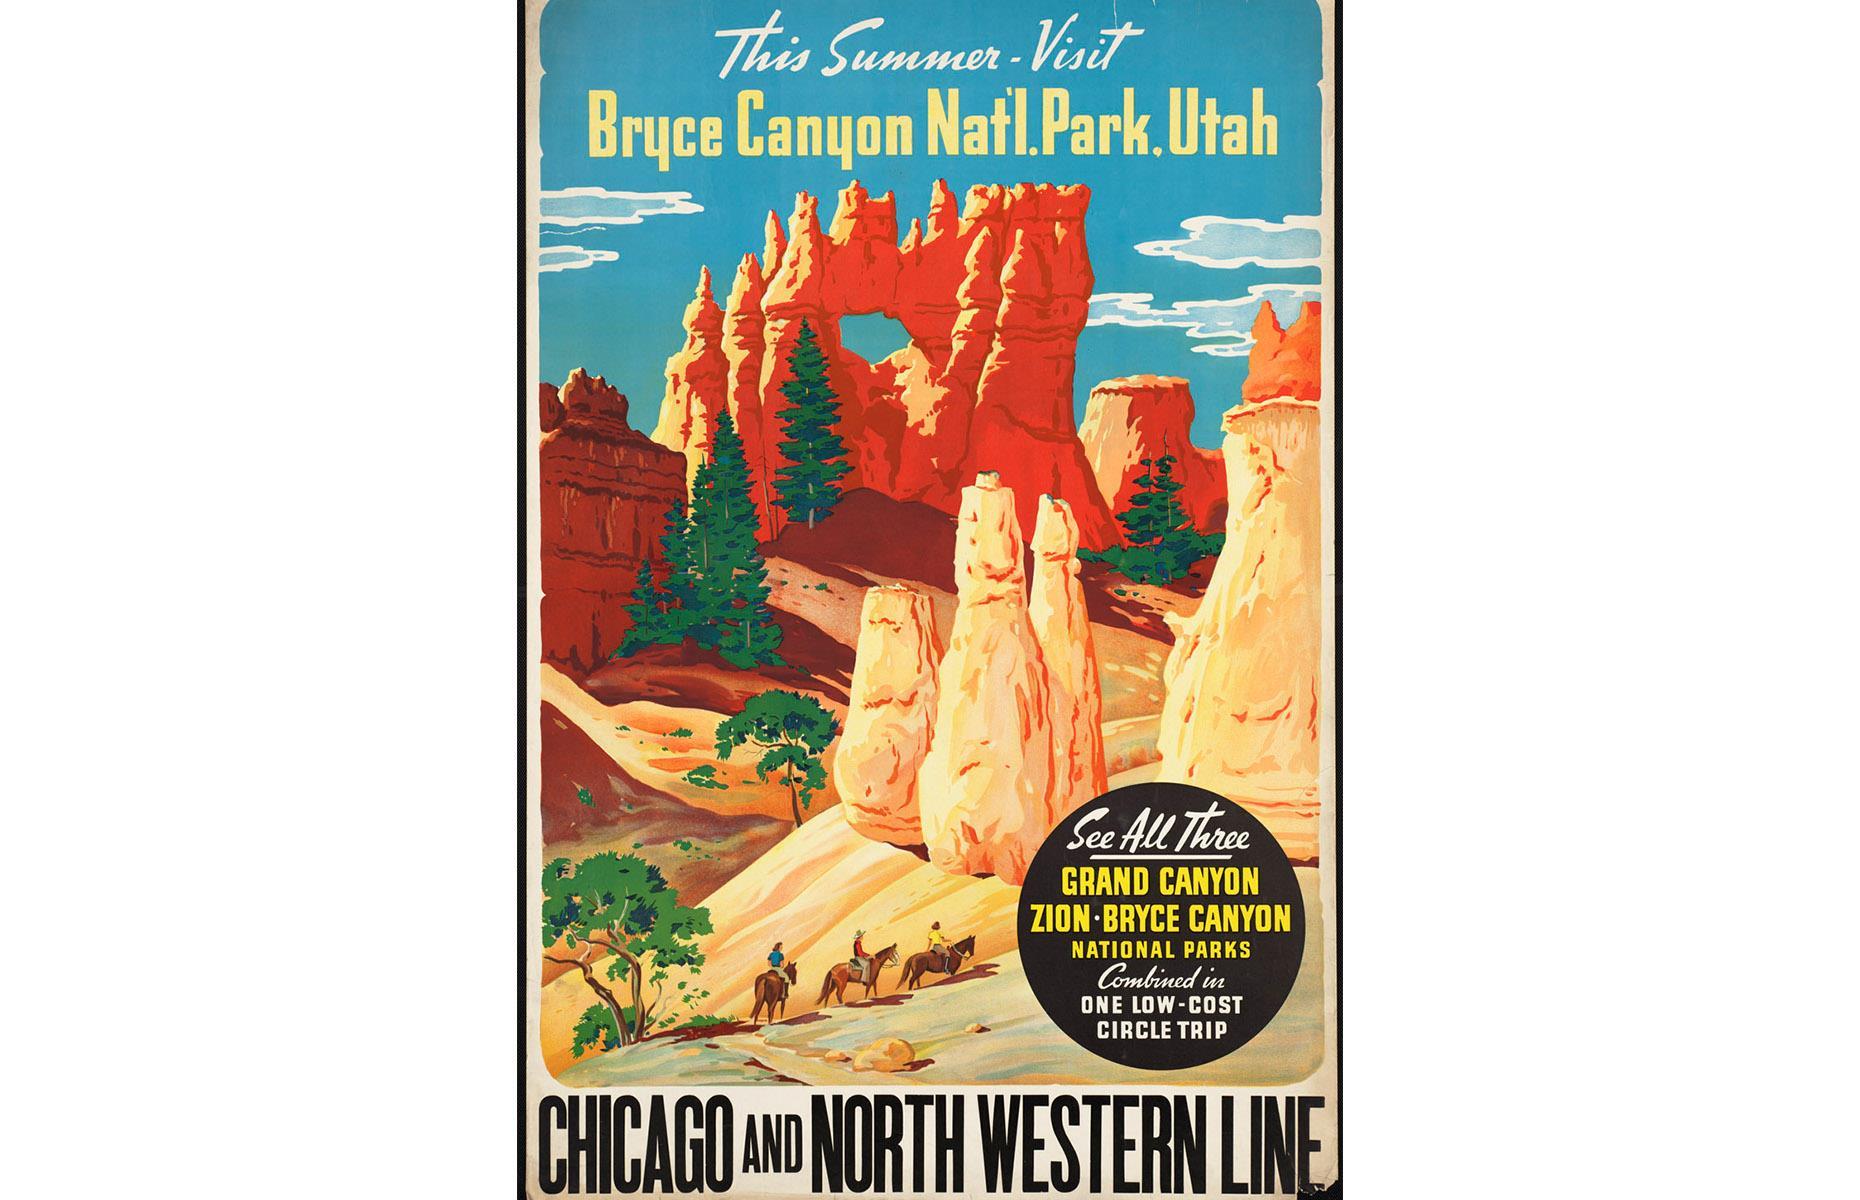 <p>Bryce Canyon National Park is the star of this railroad advert and its fiery pinnacles look mighty fine against a vivid blue sky. The poster promotes a journey with the Chicago and North Western Railway Company that joins up three of America's most spectacular national parks: Bryce Canyon, Zion and the Grand Canyon. </p>  <p><a href="https://www.loveexploring.com/galleries/107668/historic-photos-of-americas-national-parks?page=1"><strong>These historic photos show what America's national parks used to look like</strong></a></p>